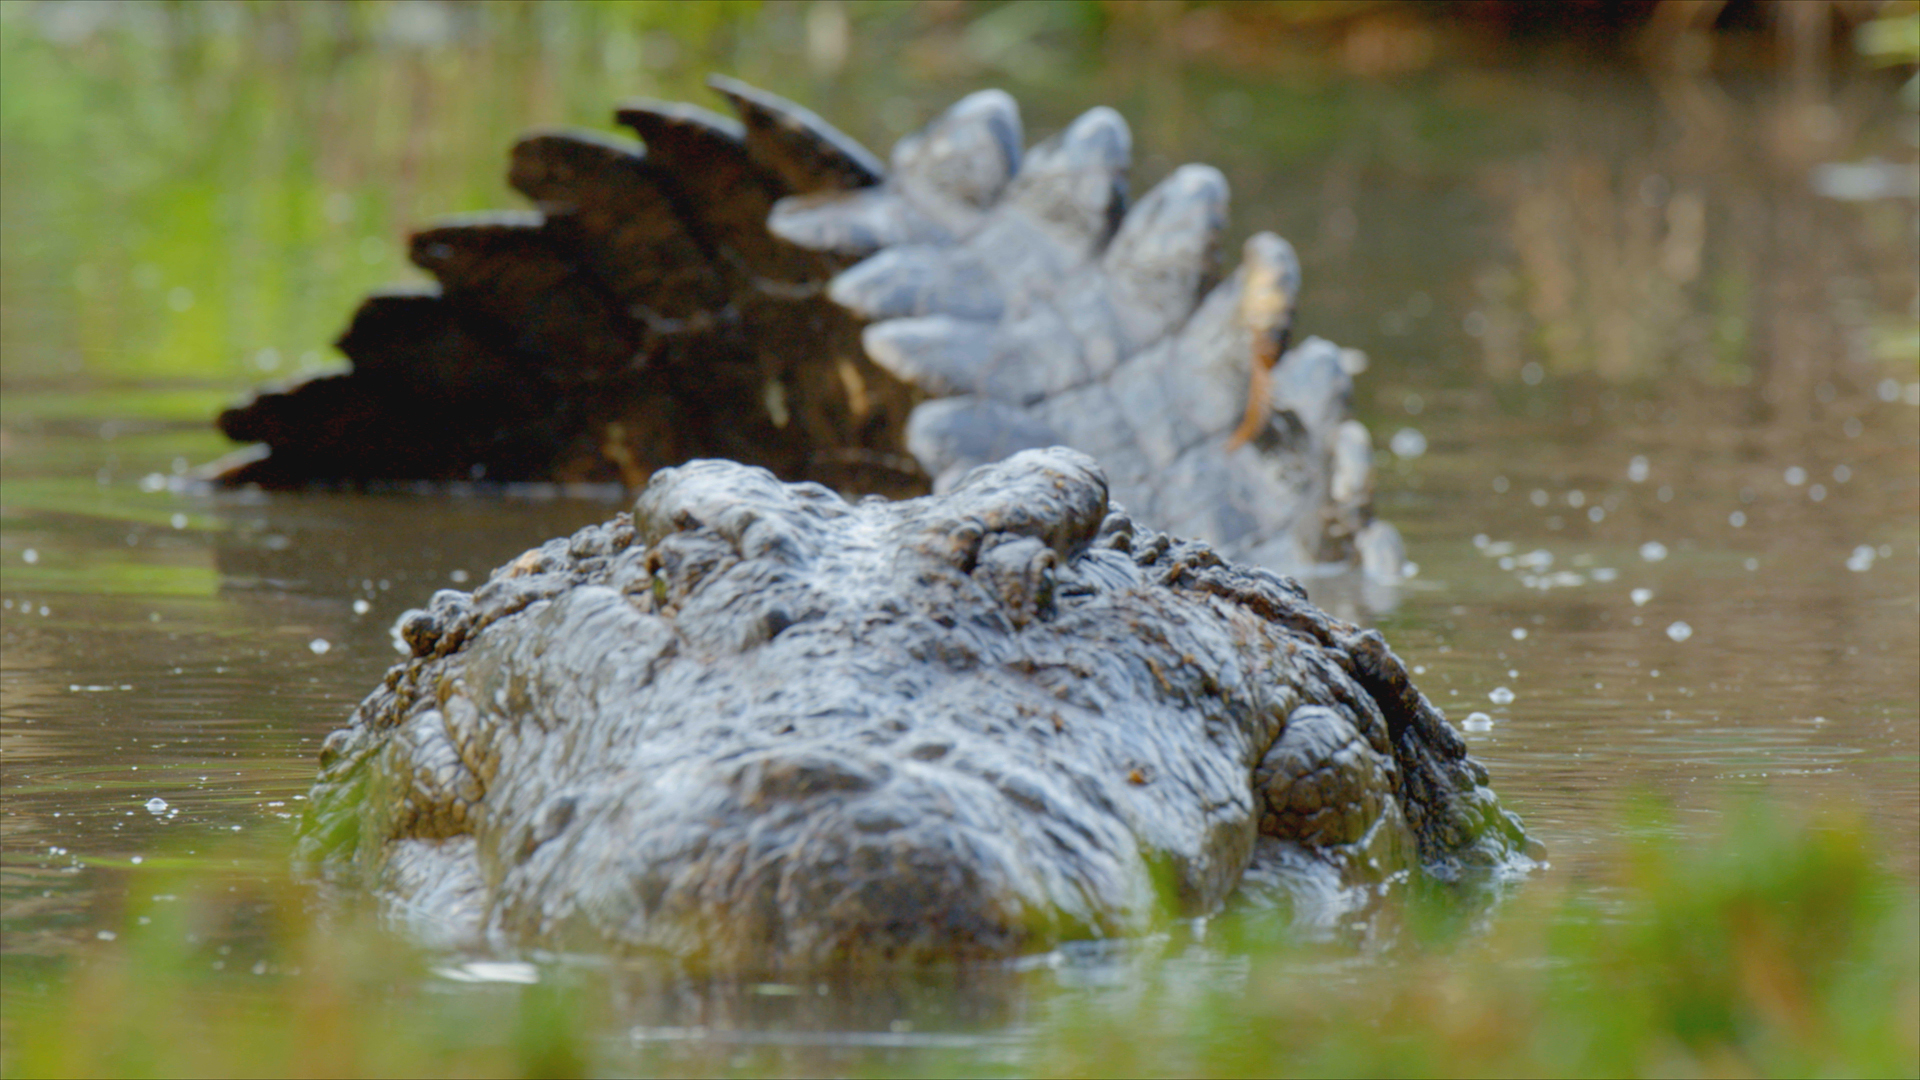 Crocodile swimming. This is from Madagascar's Weirdest. [Photo of the day - April 2022]